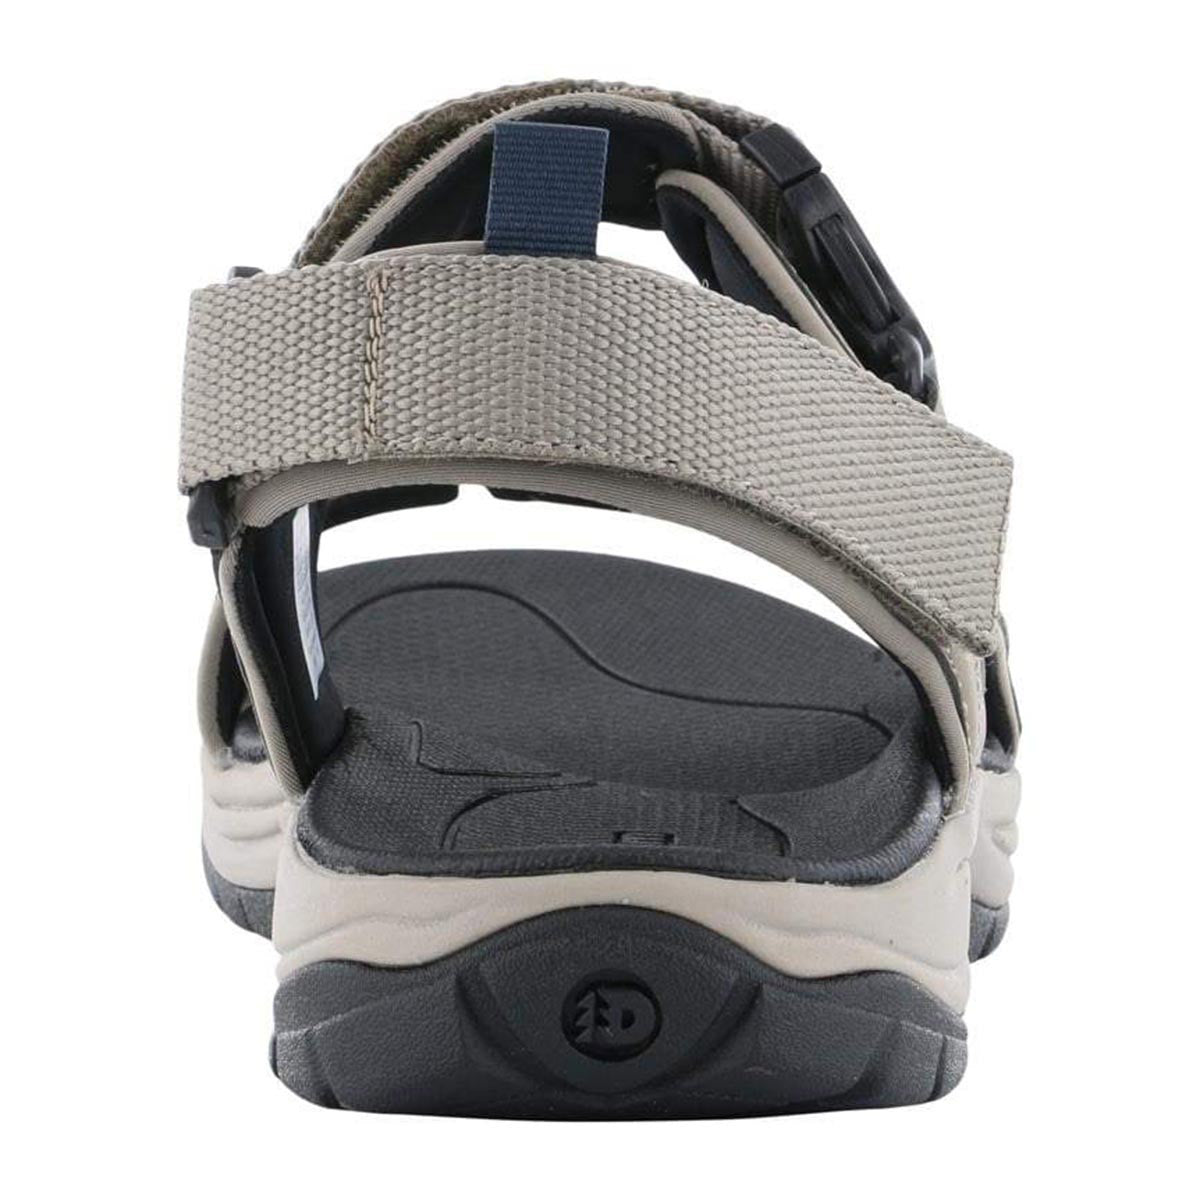 Rear view of a gray two-strap Dunham sport sandal with adjustable straps and a cushioned heel.